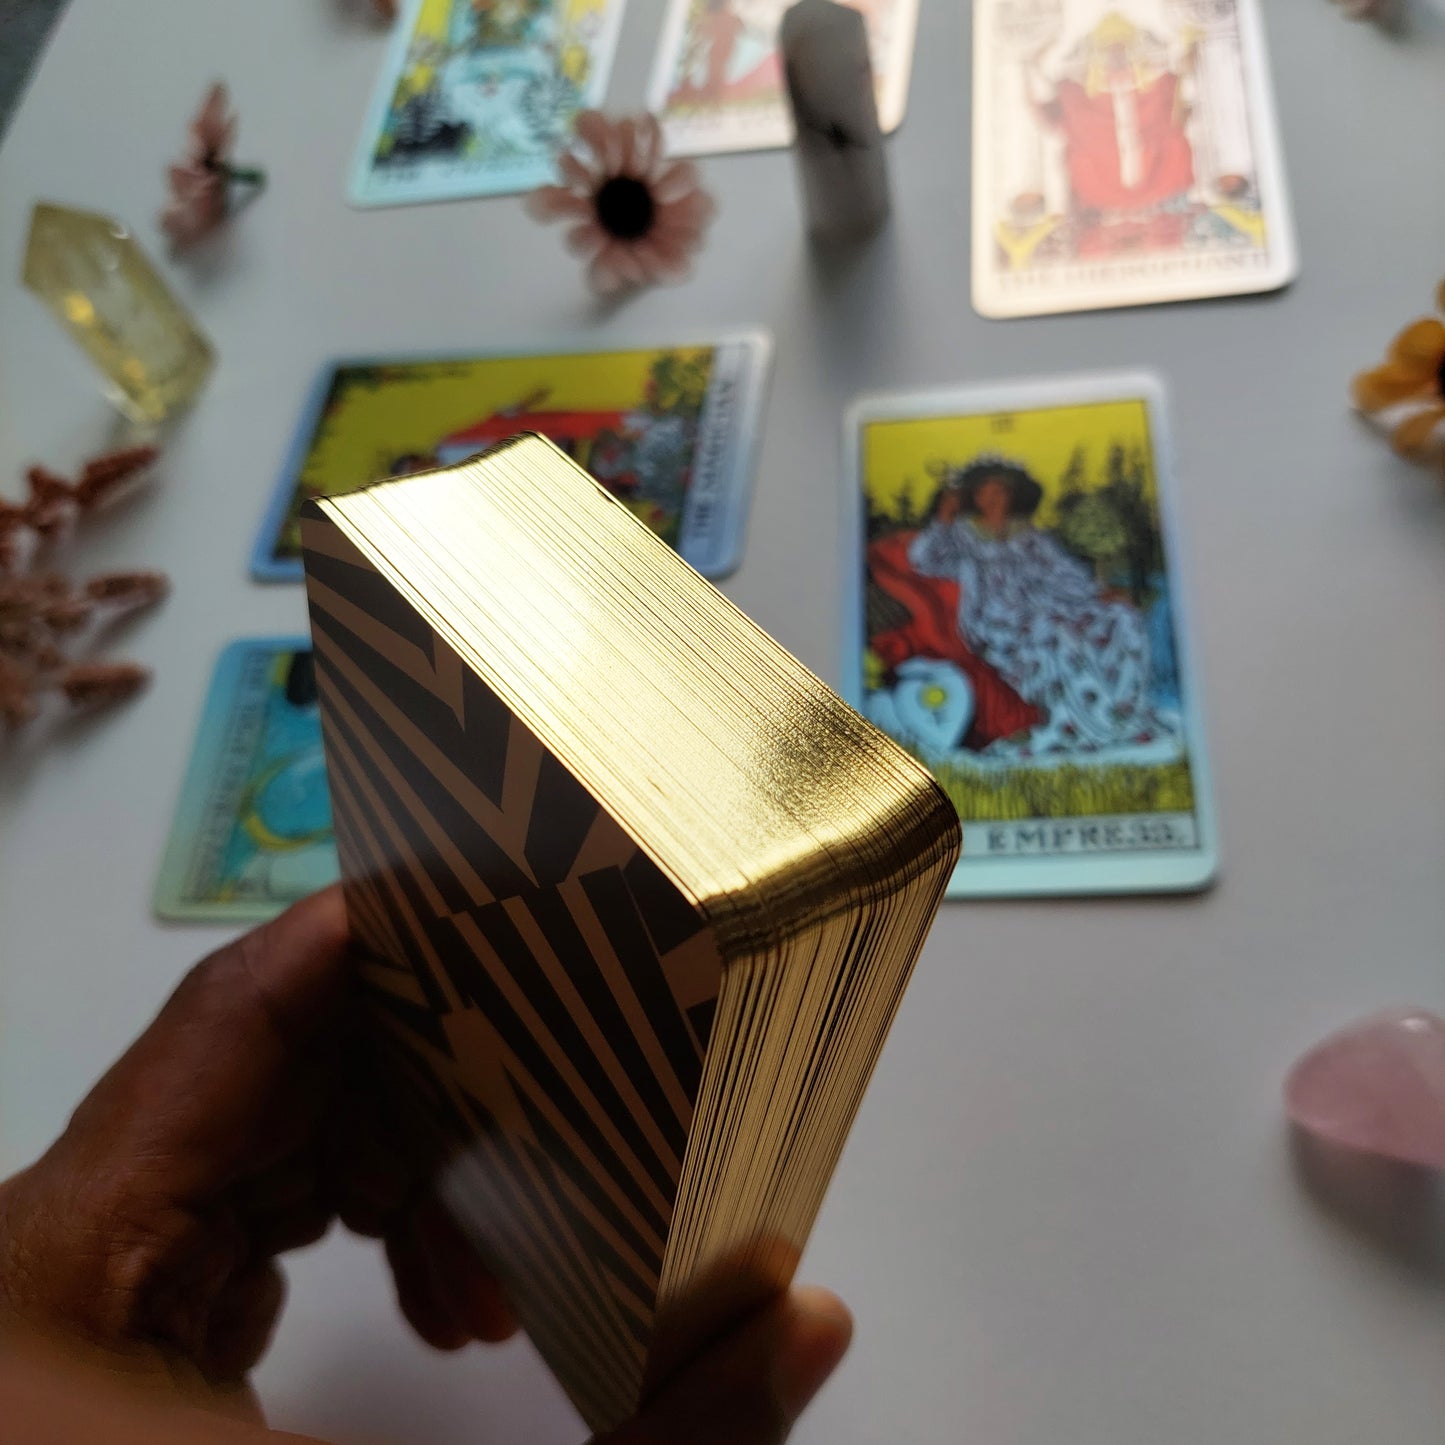 Holographic Mahogany Tarot Deck Limited Edition (GOLD GILDING with THIN CARD STOCK) Size 2.75”x4.75”